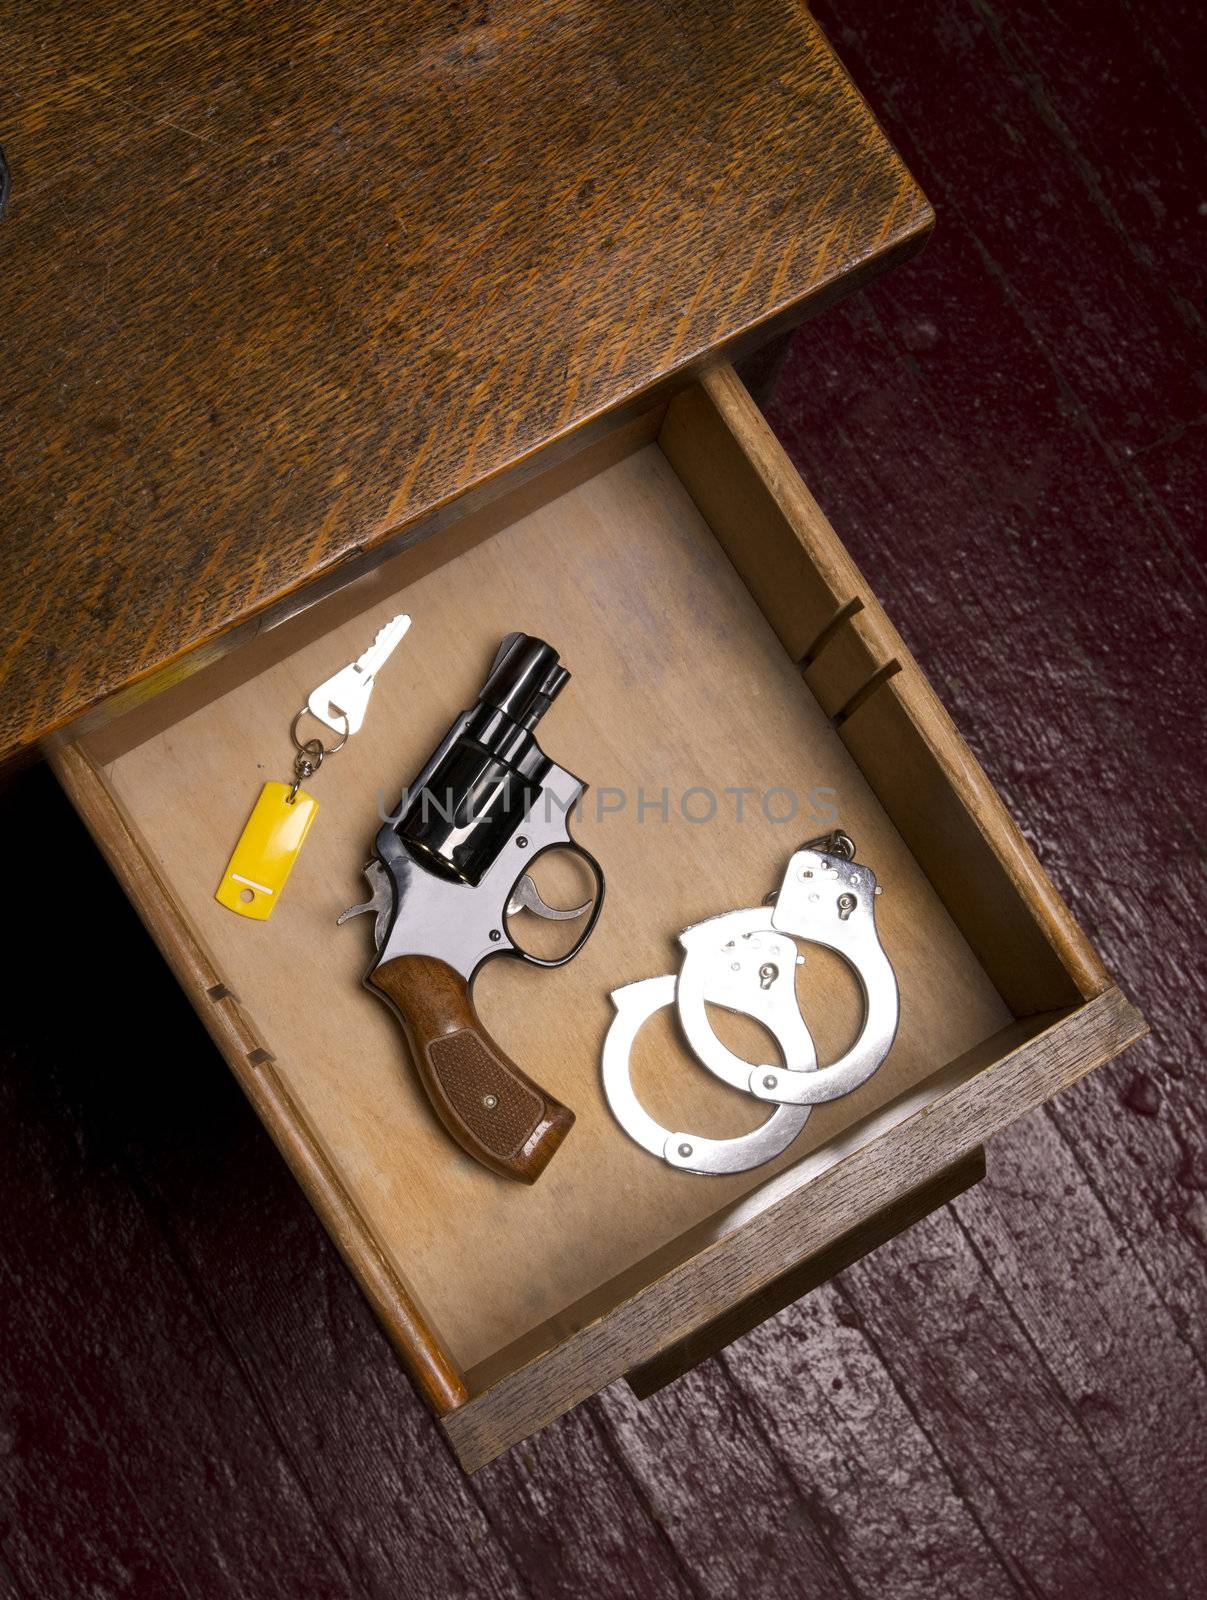 38 Revolver in Desk Drawer with Handcuffs  by ChrisBoswell